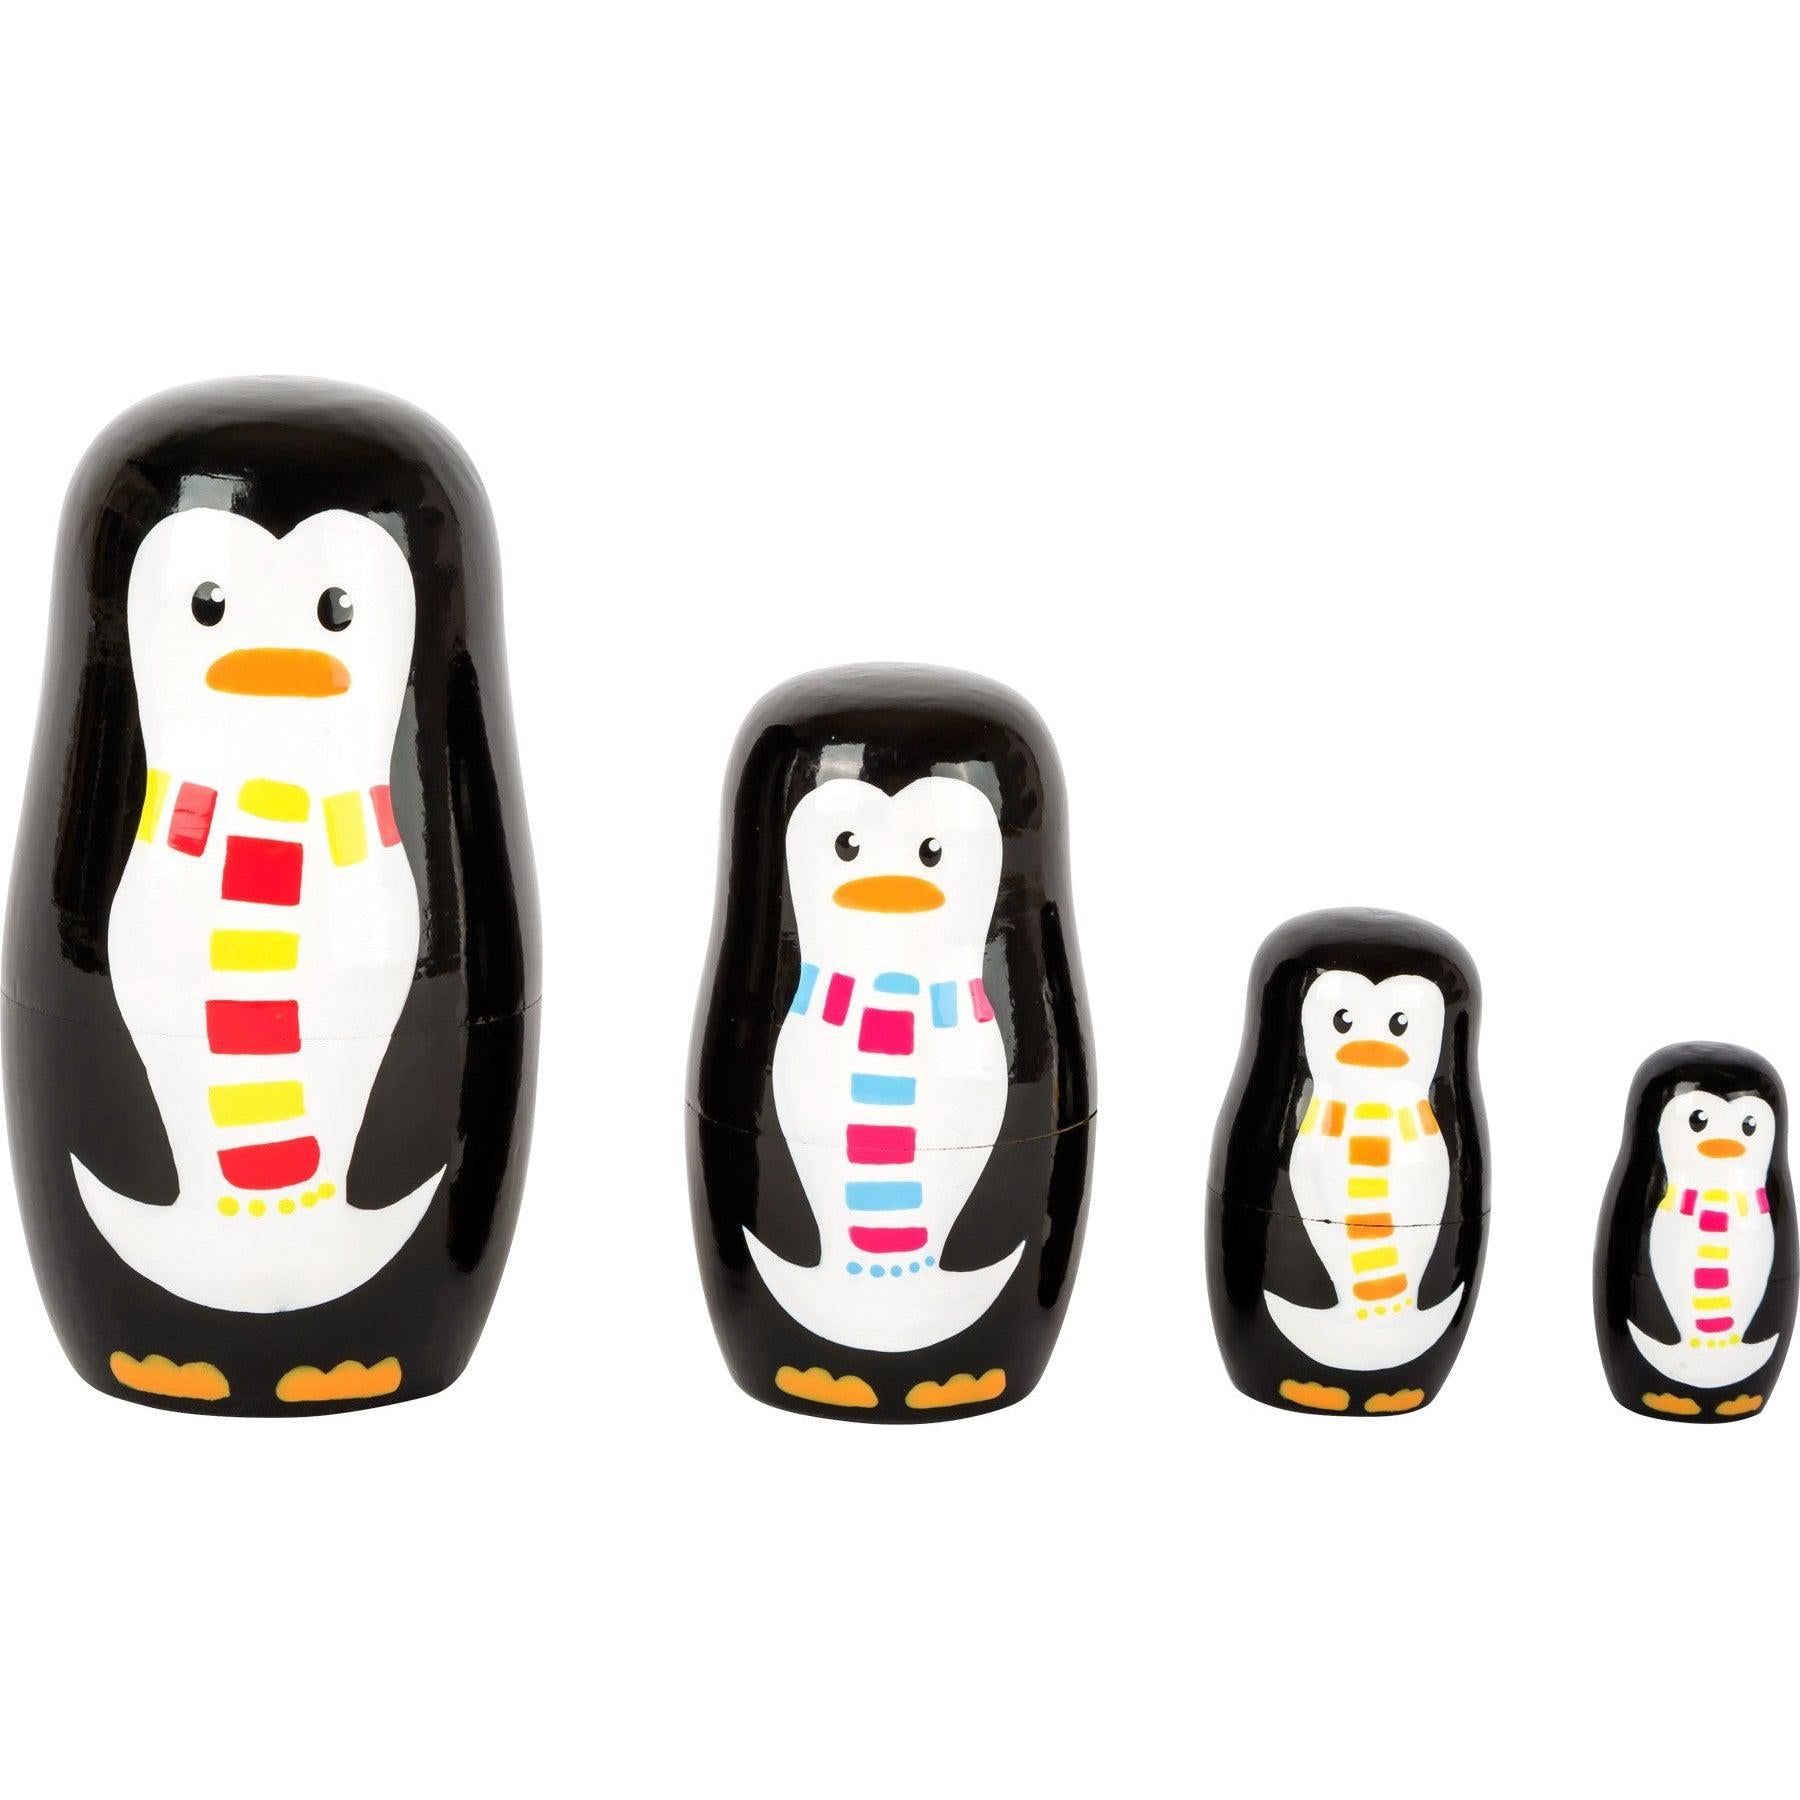 Penguin Family Nesting Dolls, Introducing our delightful Penguin Family Nesting Dolls! With their bright and bold designs, these stunning dolls are guaranteed to be a hit with children of all ages. Not only are they visually appealing, but they also provide a convenient source of entertainment while on the go.Perfectly sized for traveling, these nesting dolls are a must-have for long car rides, vacations, or even a day out at the park. Lightweight and easy to carry, they are the ideal companion when your li